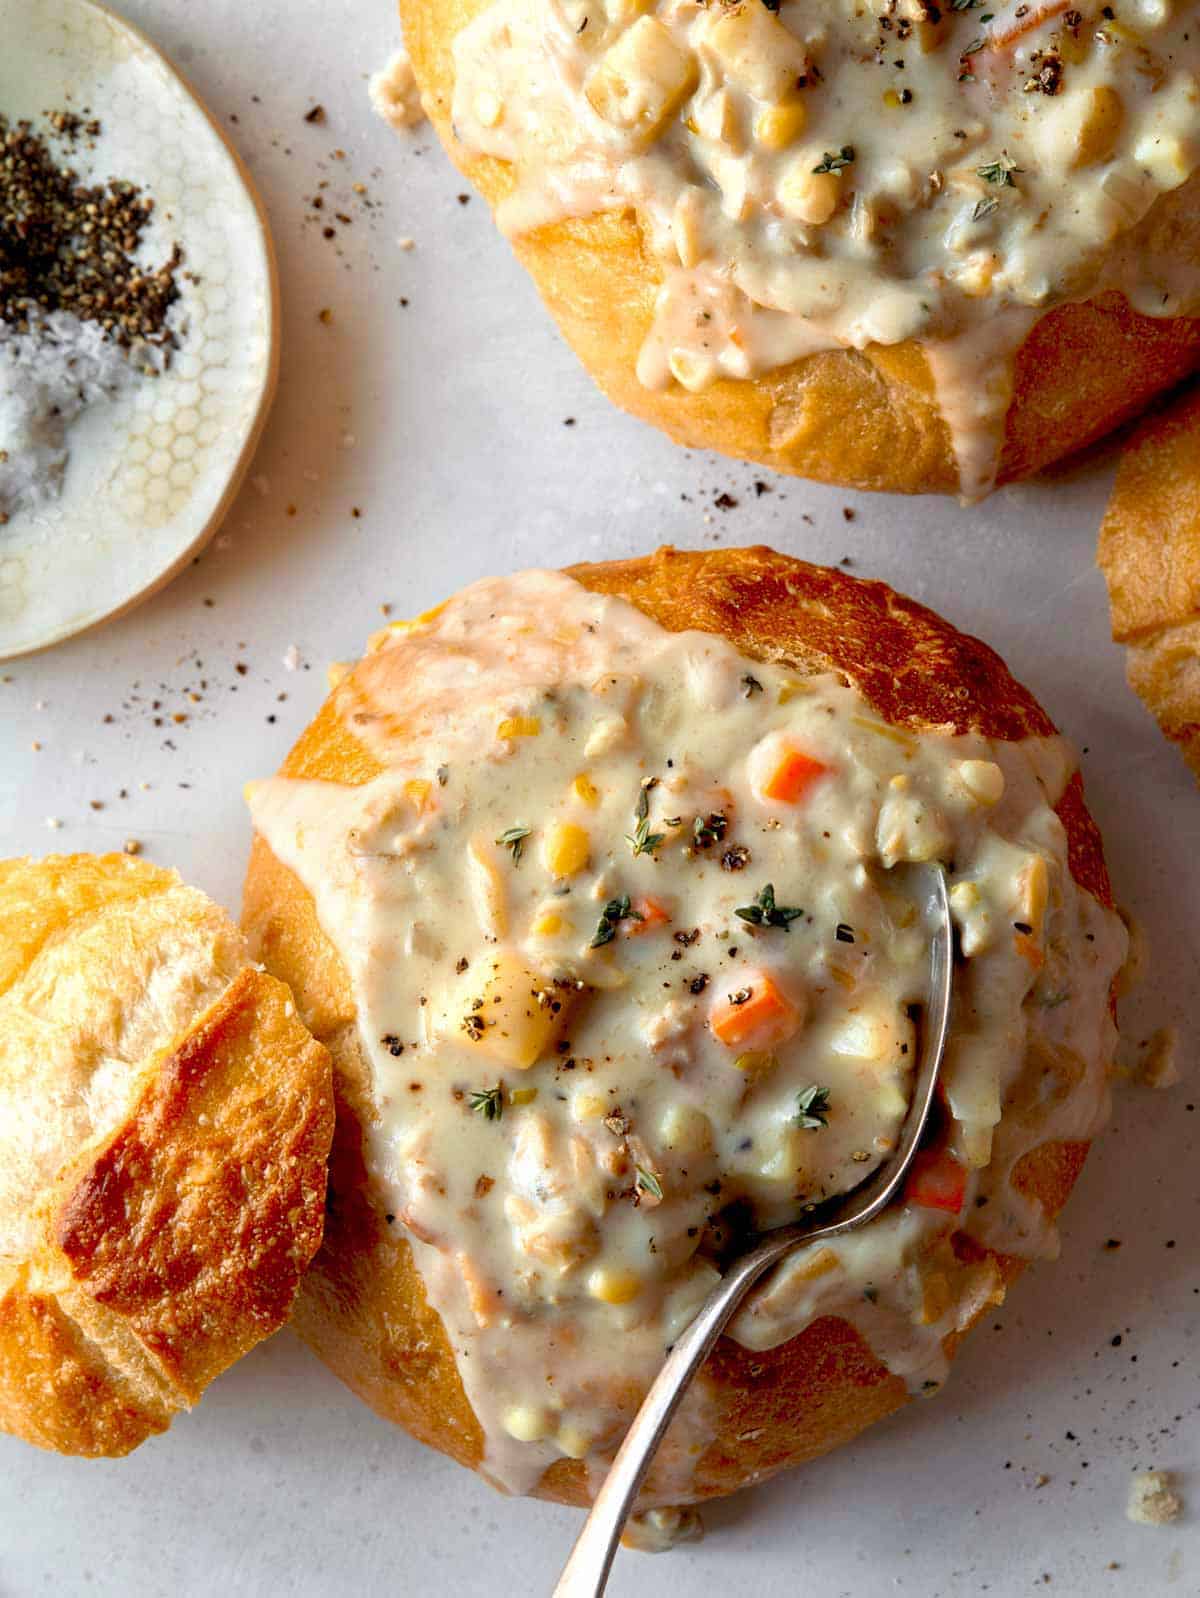 Clam chowder recipe in two bread bowls with a spoon in one.